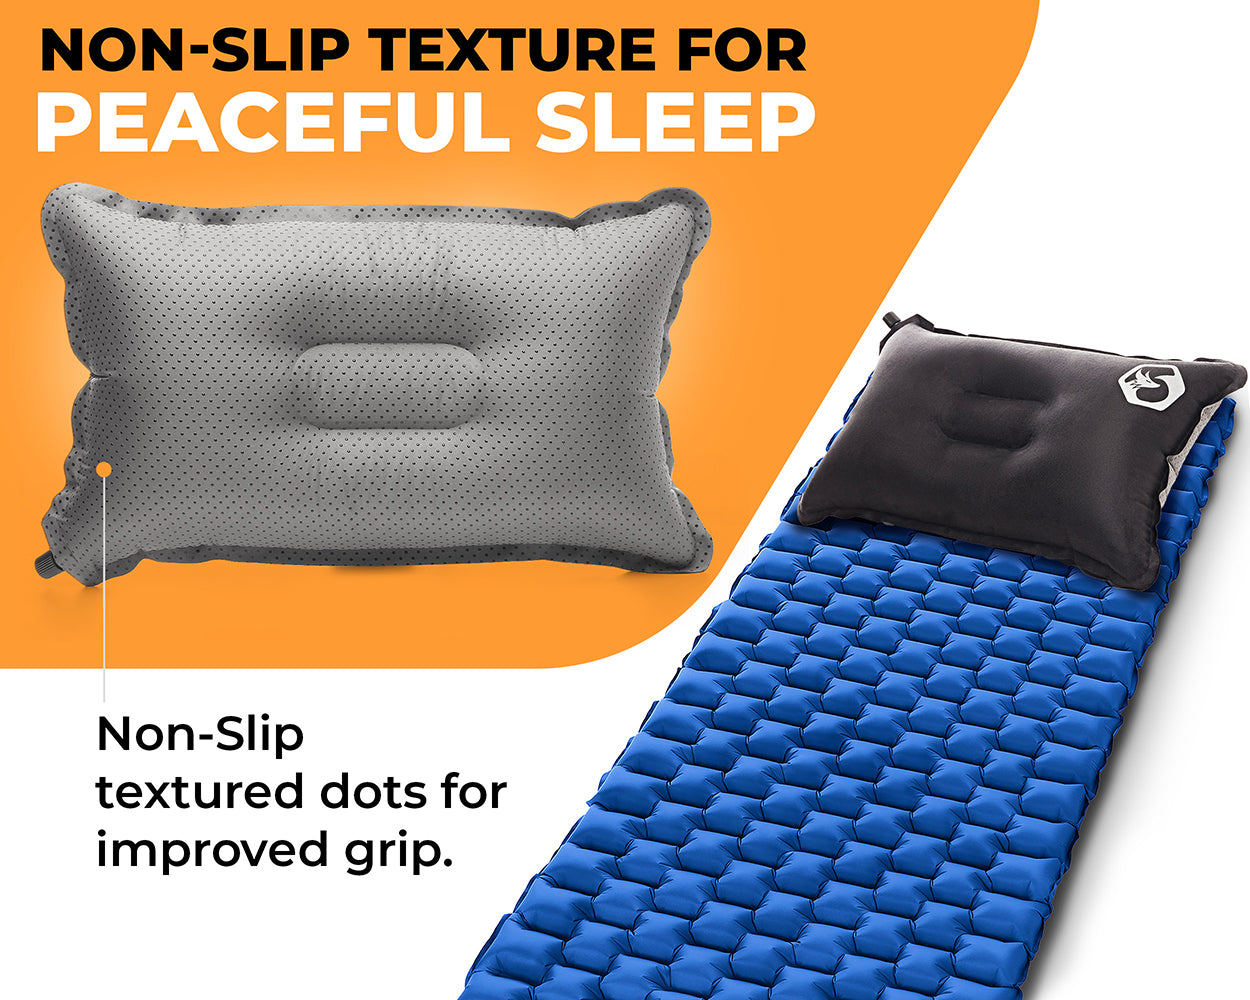 Ultralight Inflatable Camp Pillow by Near Zero